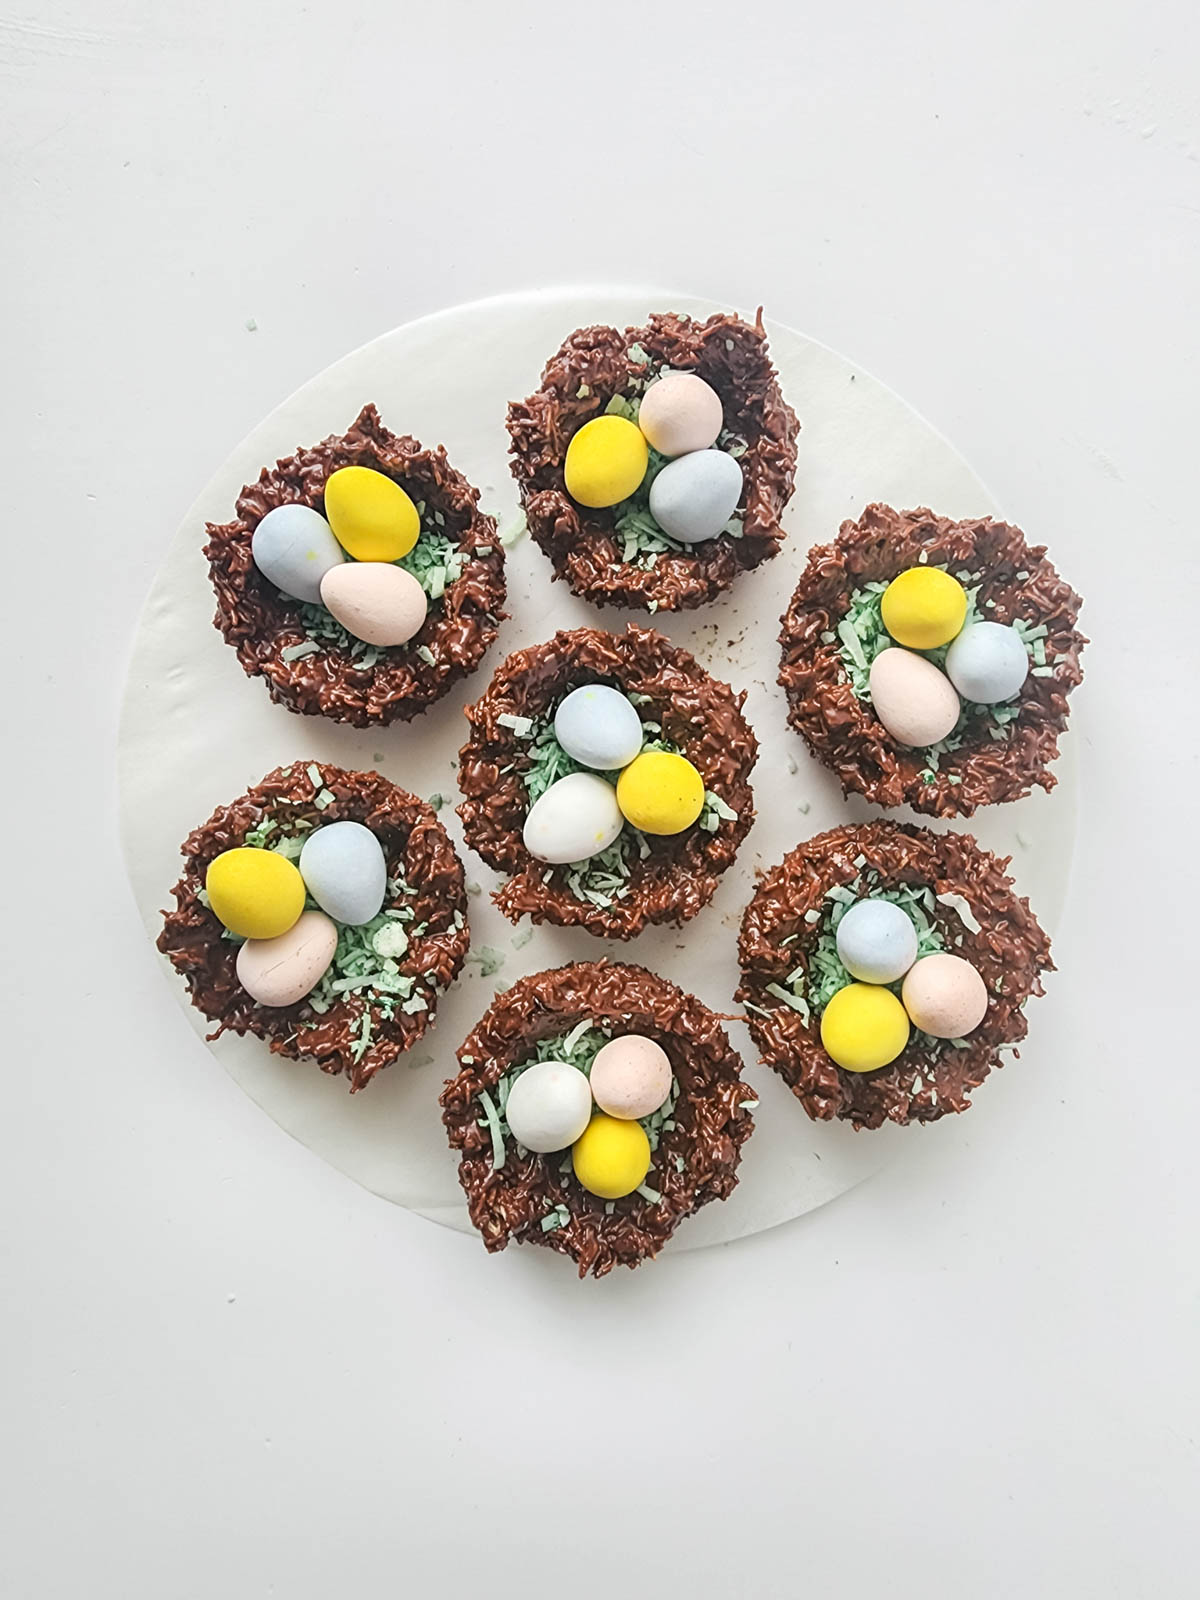 Bird nests filled with coconut and chocolate eggs